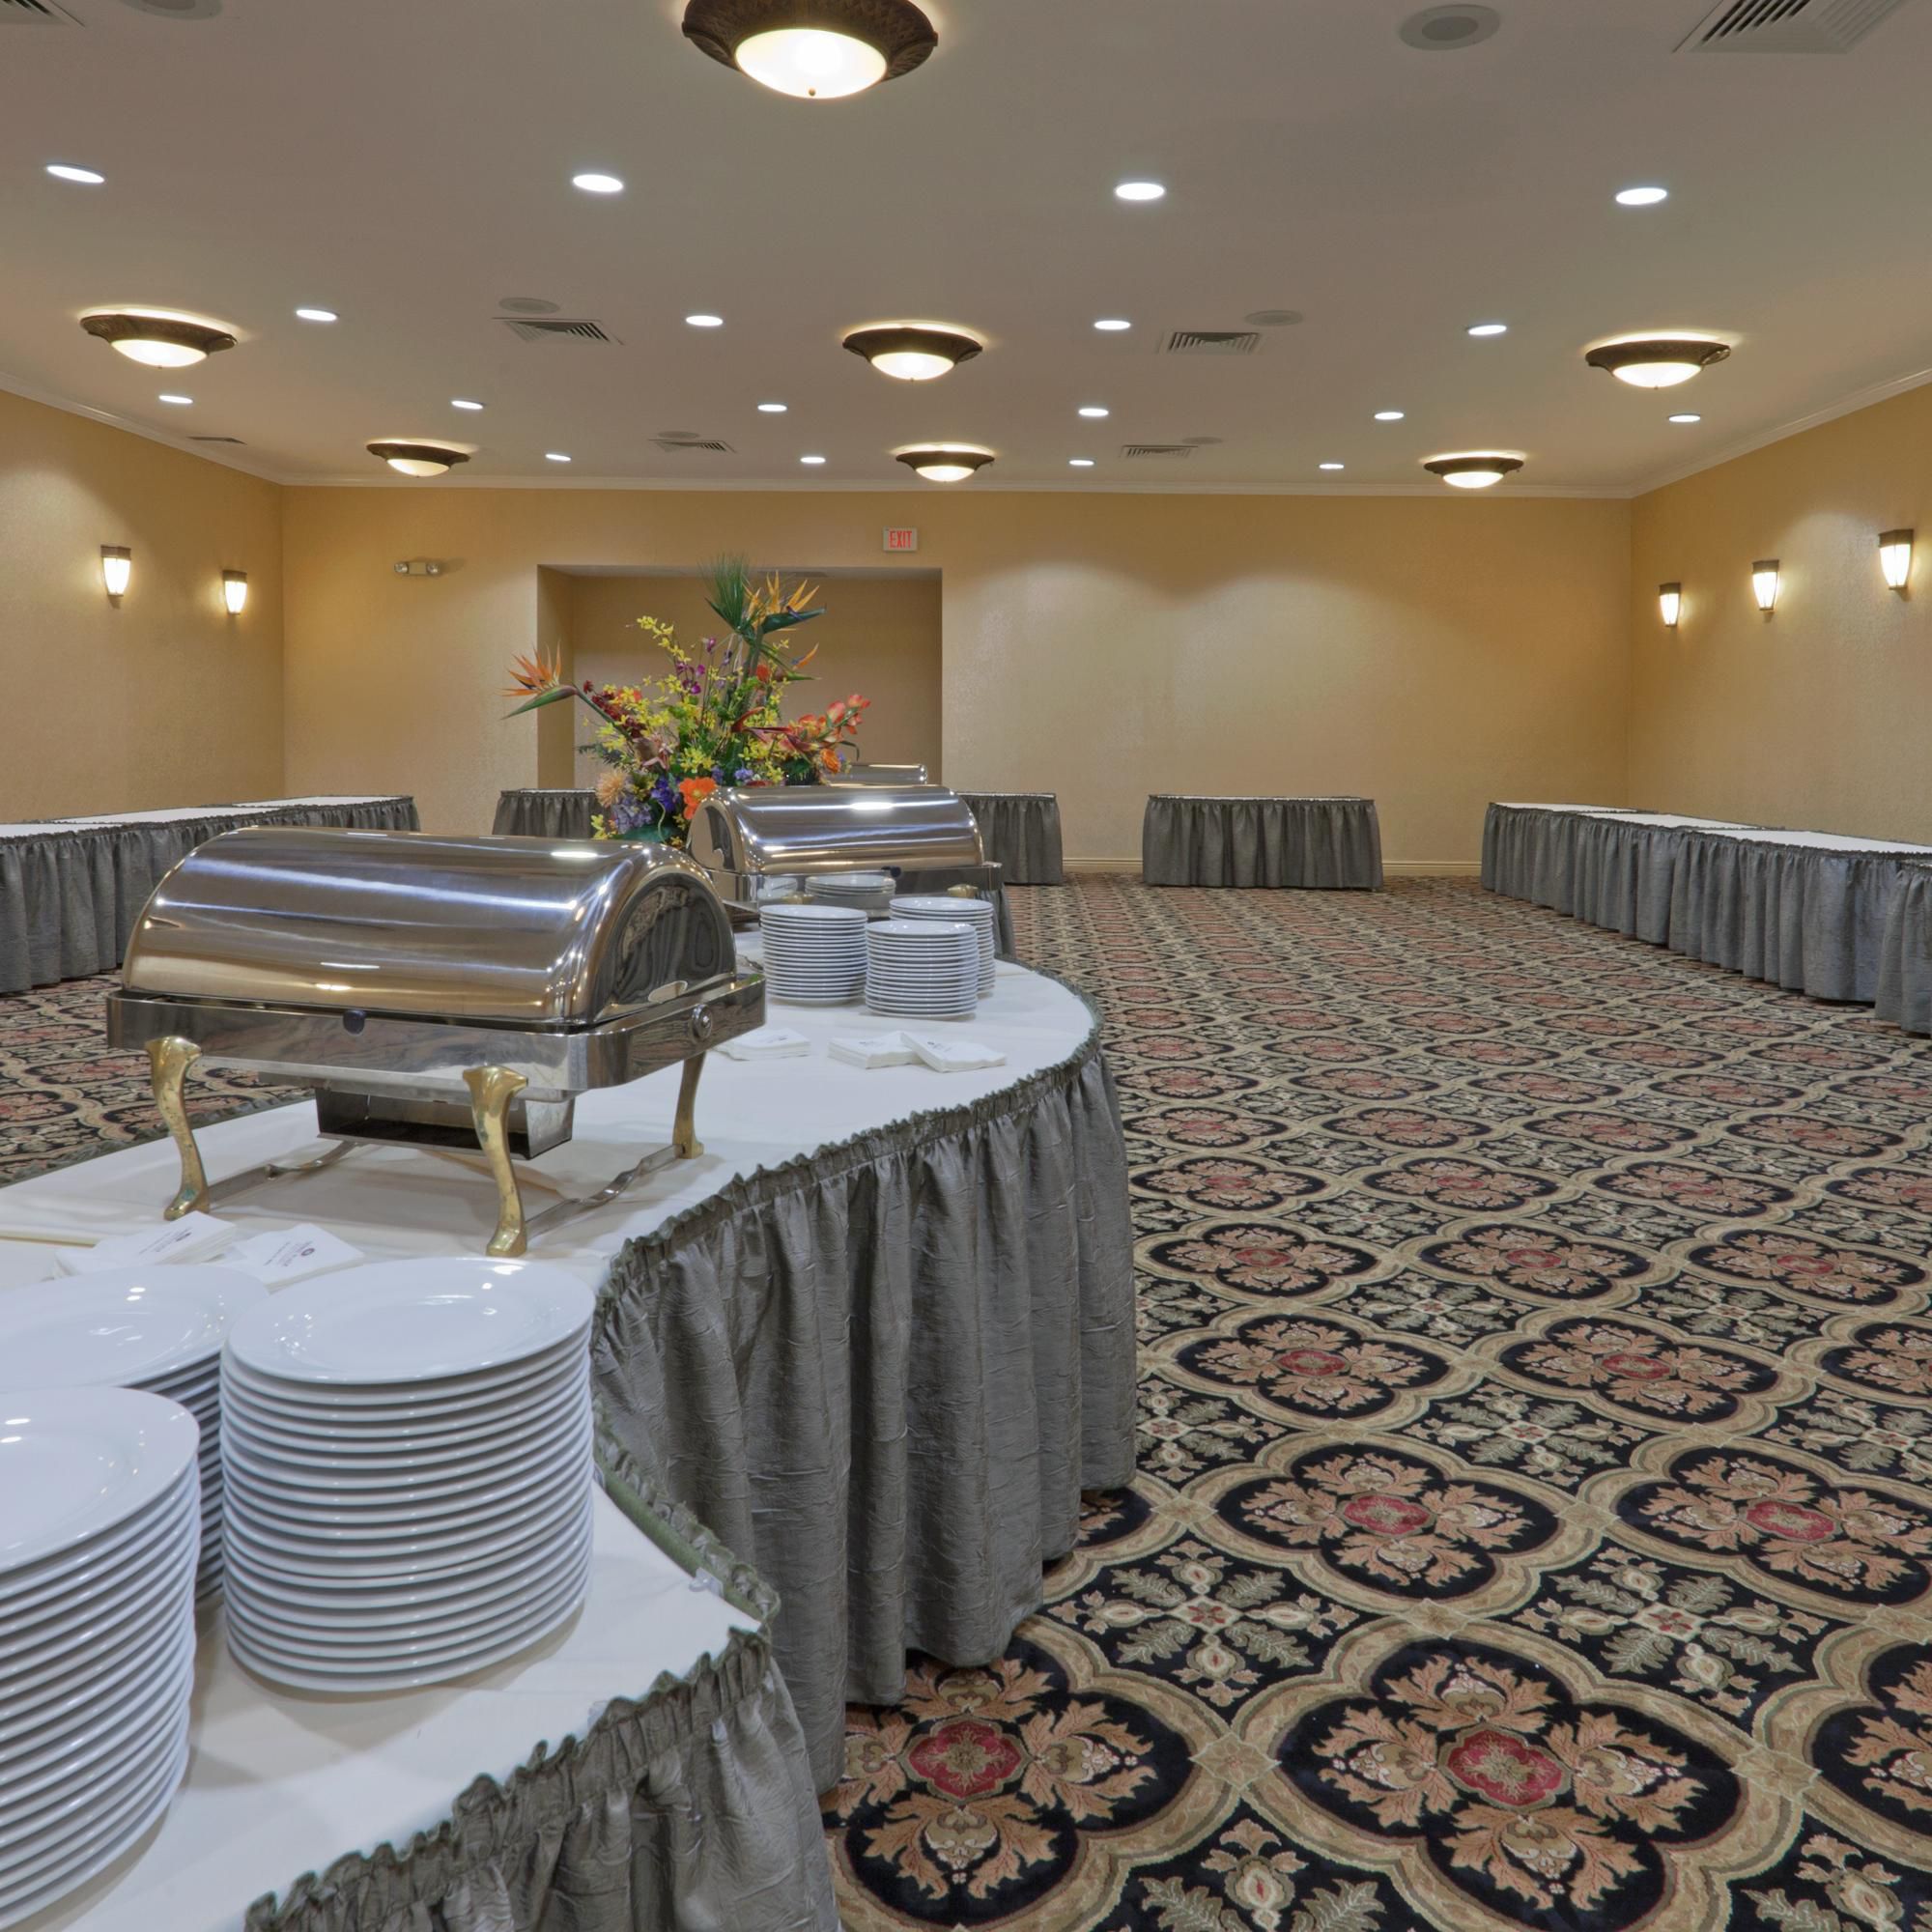 Our Lahaina Bay room is perfect for social events